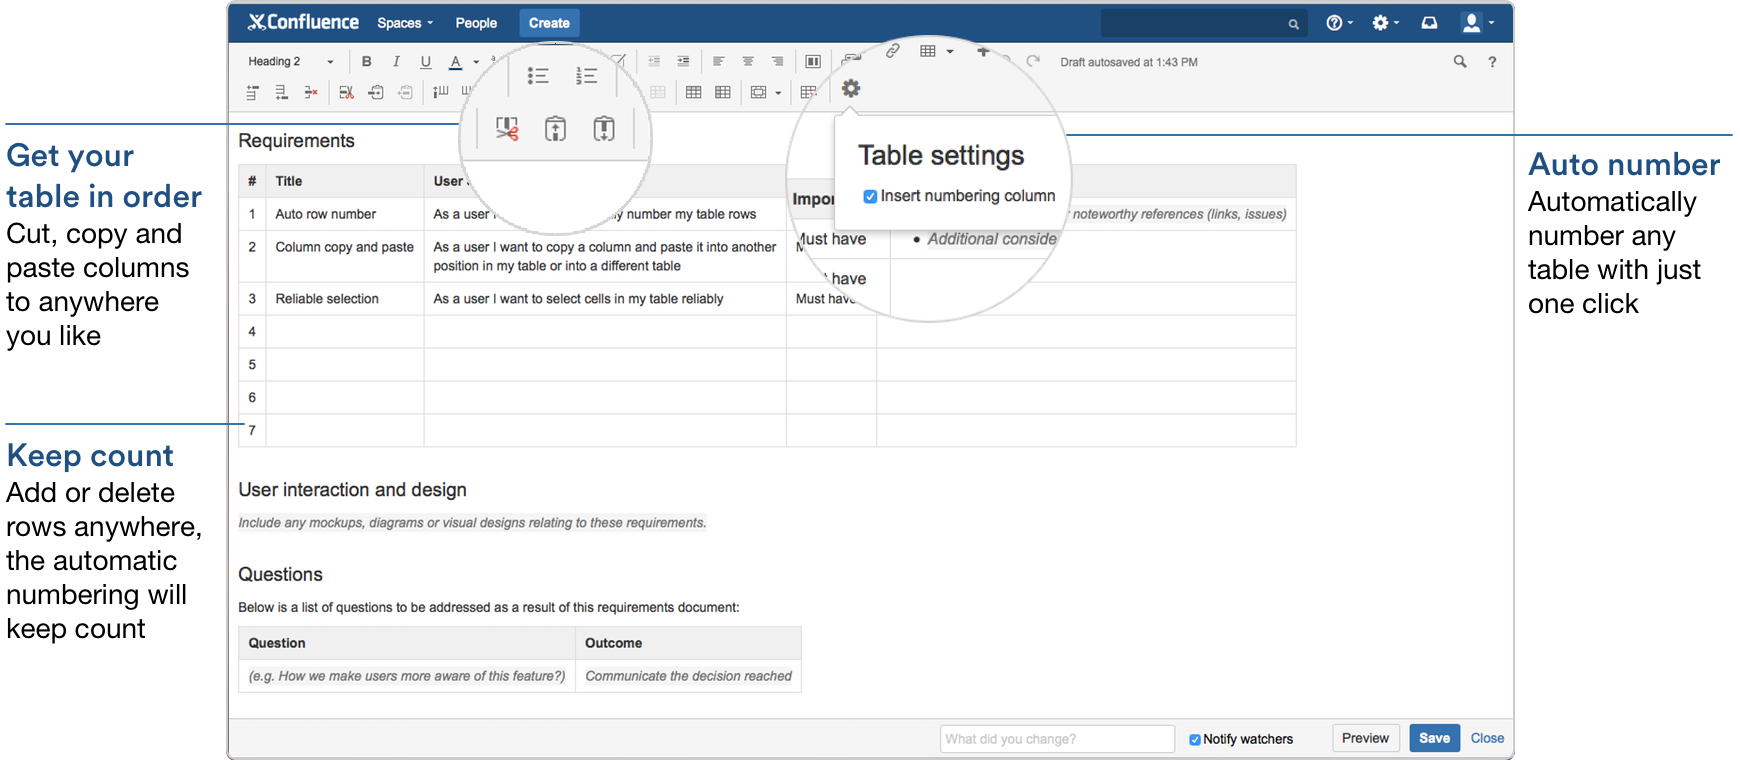 how to use confluence table of contents macro